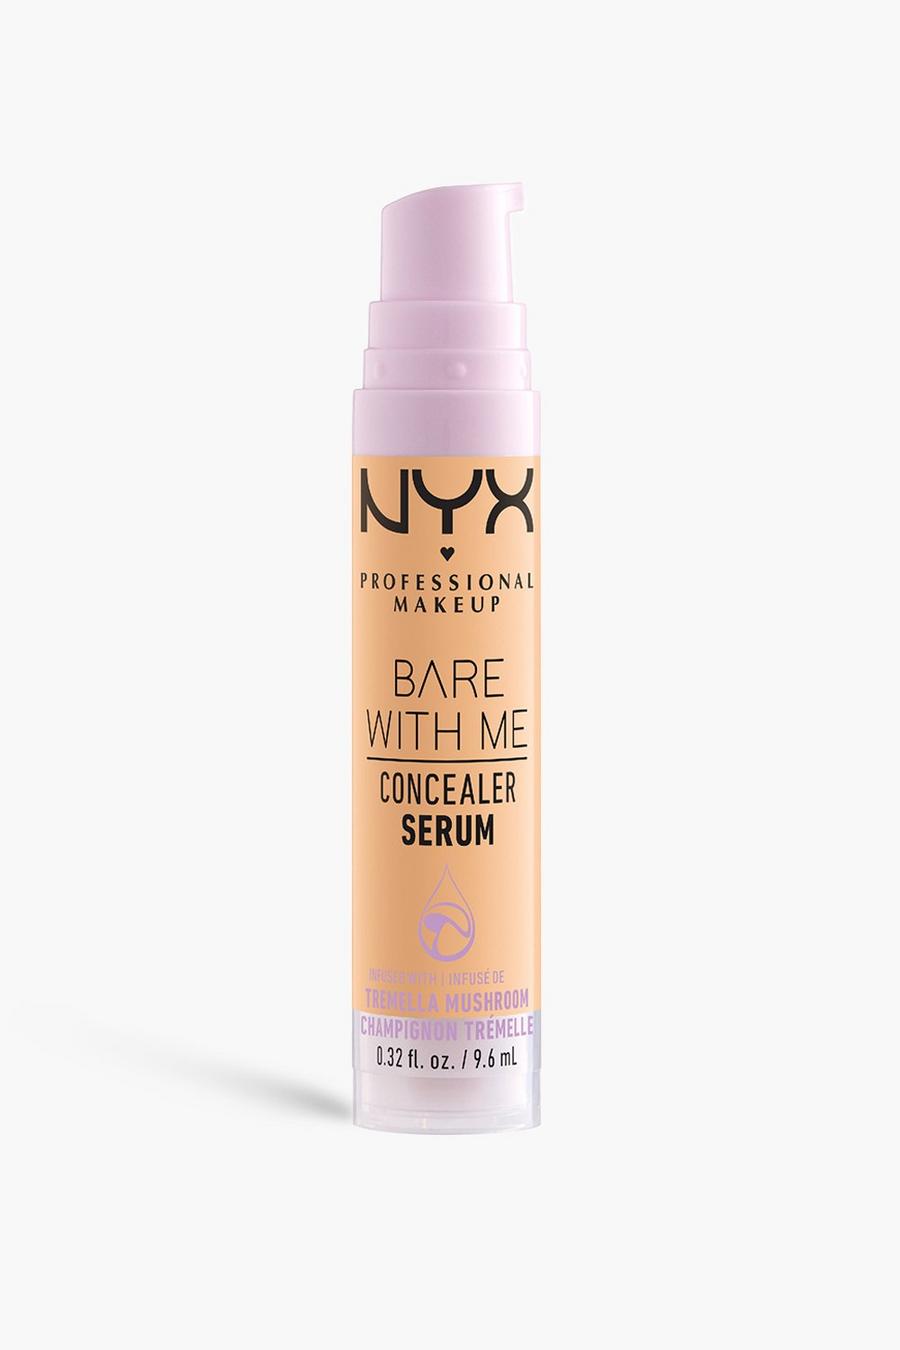 05 golden NYX Professional Makeup Bare With Me Concealer Serum